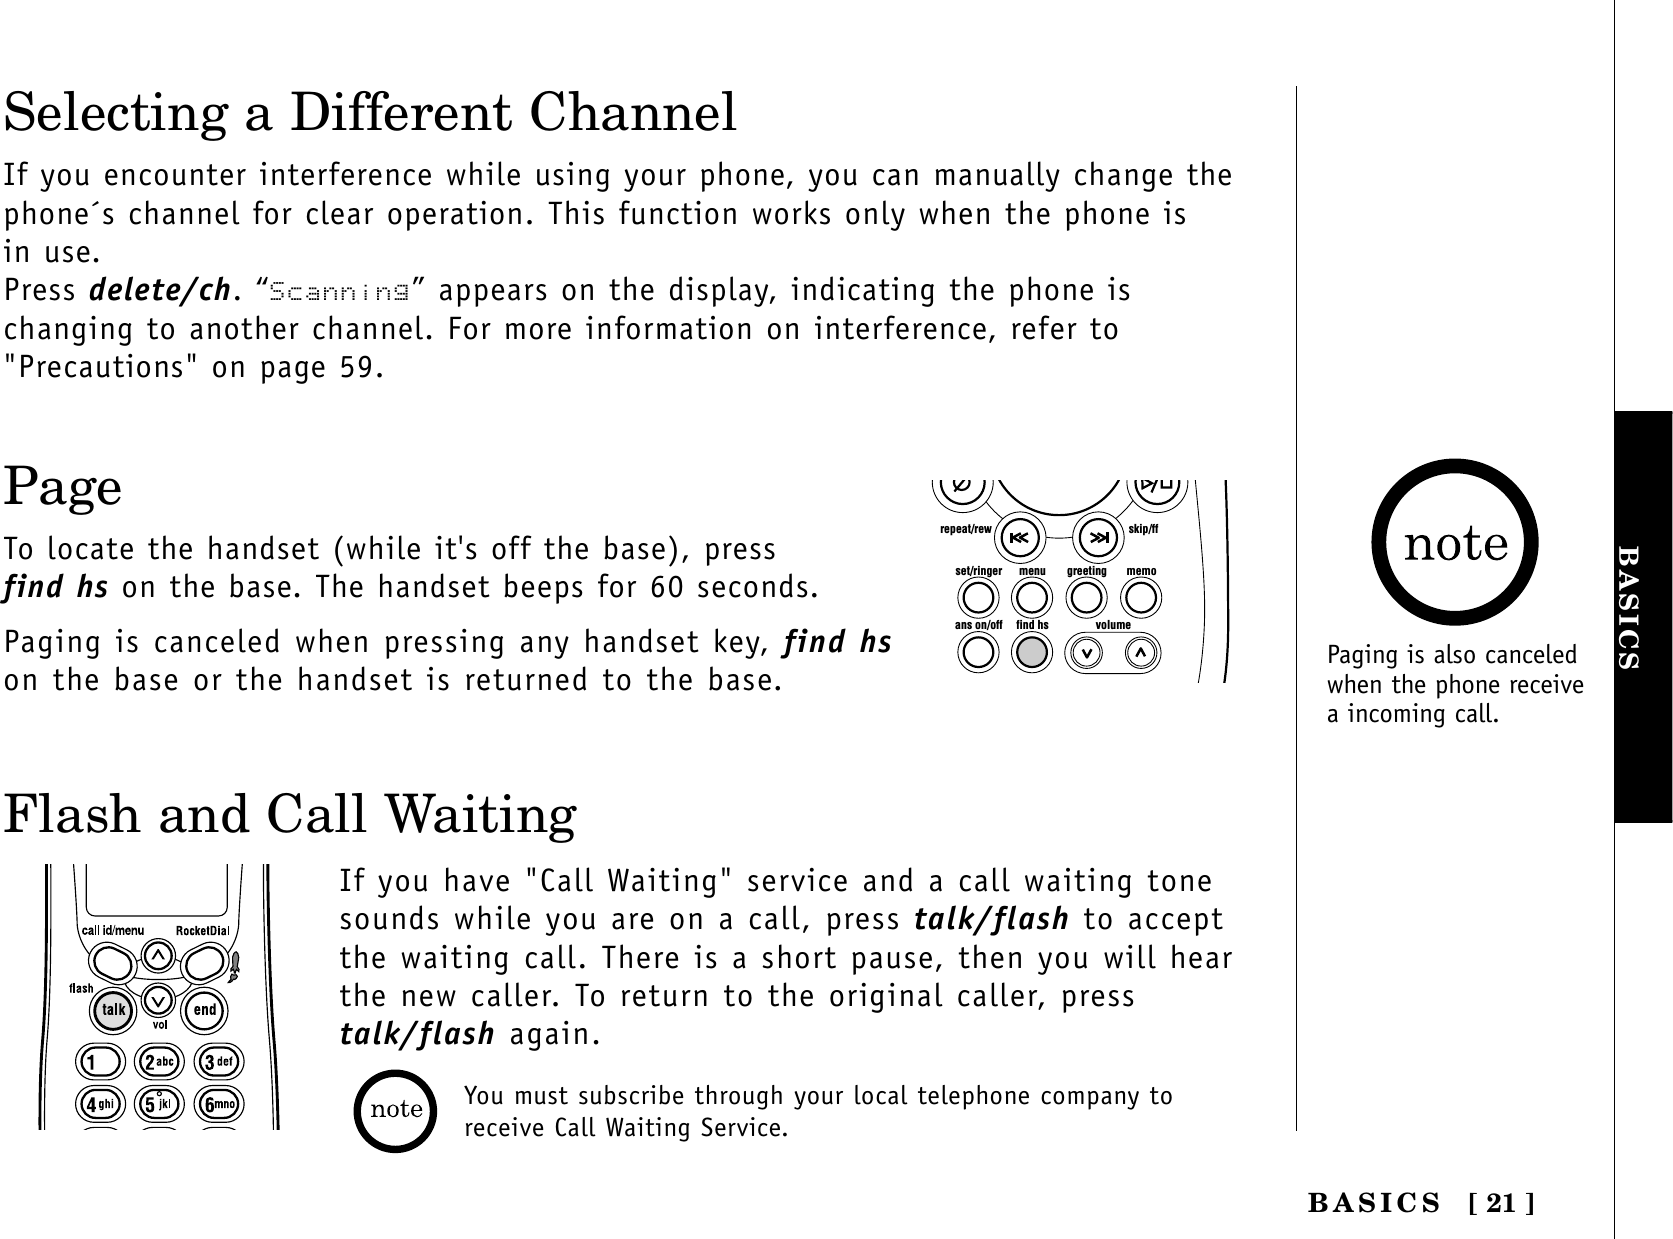 [ 21 ]BASICSBASICSYou must subscribe through your local telephone company toreceive Call Waiting Service.Flash and Call WaitingIf you have &quot;Call Waiting&quot; service and a call waiting tonesounds while you are on a call, press talk/flash to acceptthe waiting call. There is a short pause, then you will hearthe new caller. To return to the original caller, presstalk/flash again.Selecting a Different ChannelIf you encounter interference while using your phone, you can manually change thephone´s channel for clear operation. This function works only when the phone is in use.Press delete/ch. “Scanning” appears on the display, indicating the phone is changing to another channel. For more information on interference, refer to&quot;Precautions&quot; on page 59.PageTo locate the handset (while it&apos;s off the base), press find hs on the base. The handset beeps for 60 seconds.Paging is canceled when pressing any handset key, find hson the base or the handset is returned to the base.set/ringer menuans on/off find hs volumegreeting memoskip/ffrepeat/rewPaging is also canceledwhen the phone receivea incoming call.